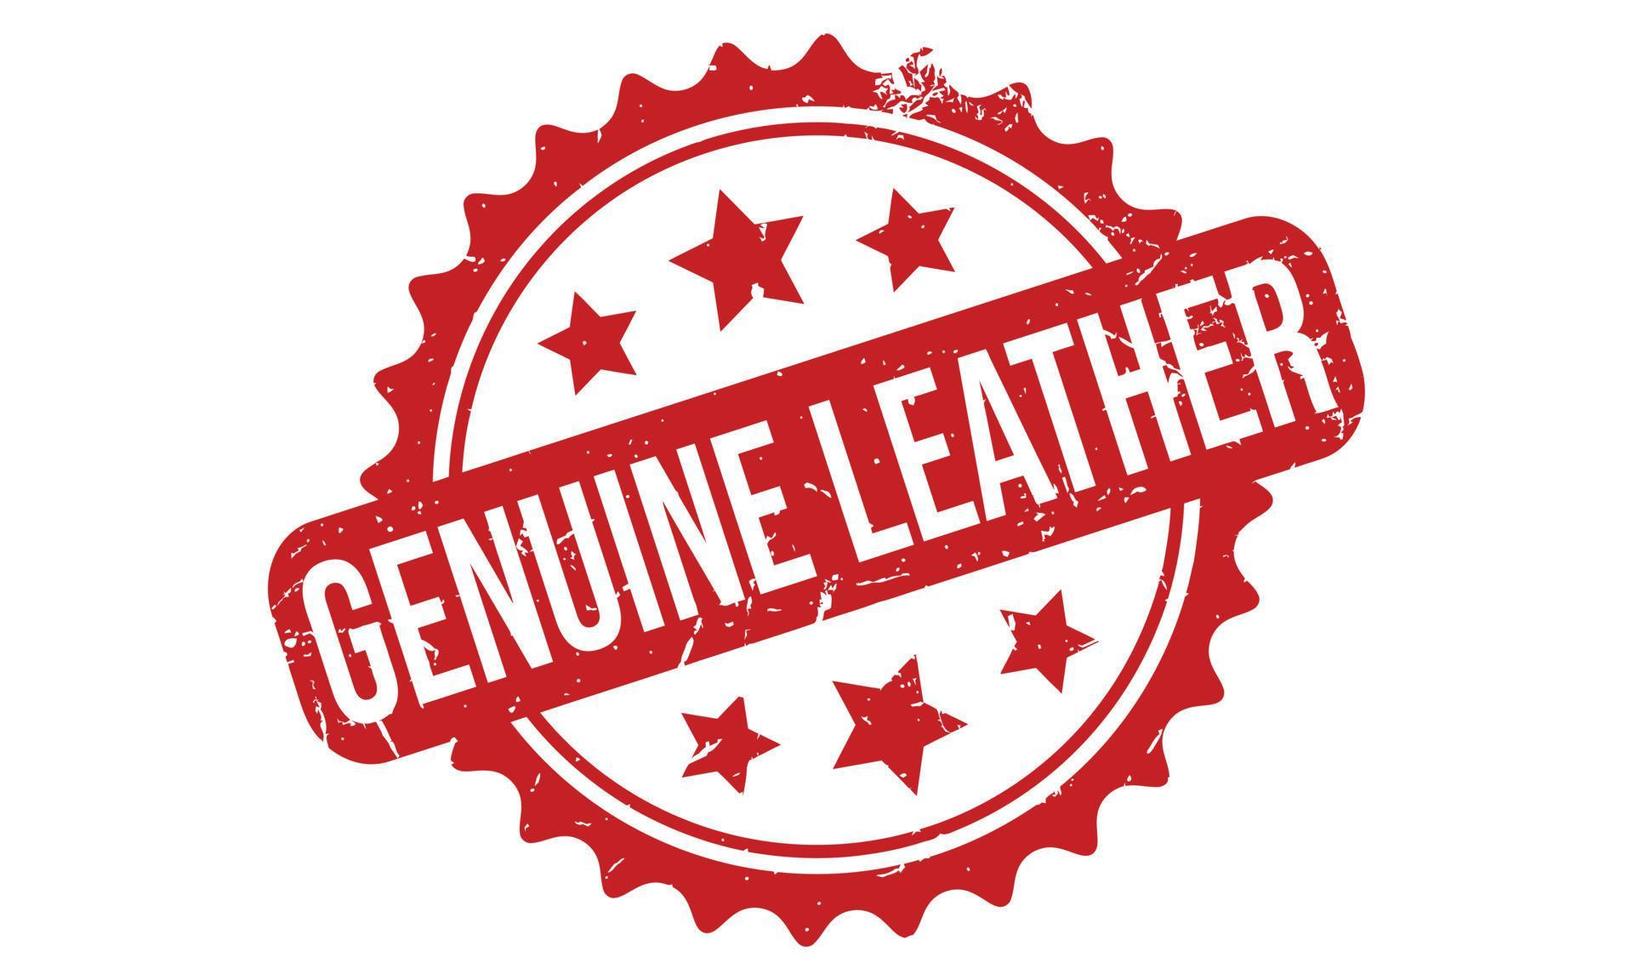 Genuine Leather Rubber Stamp Seal Vector